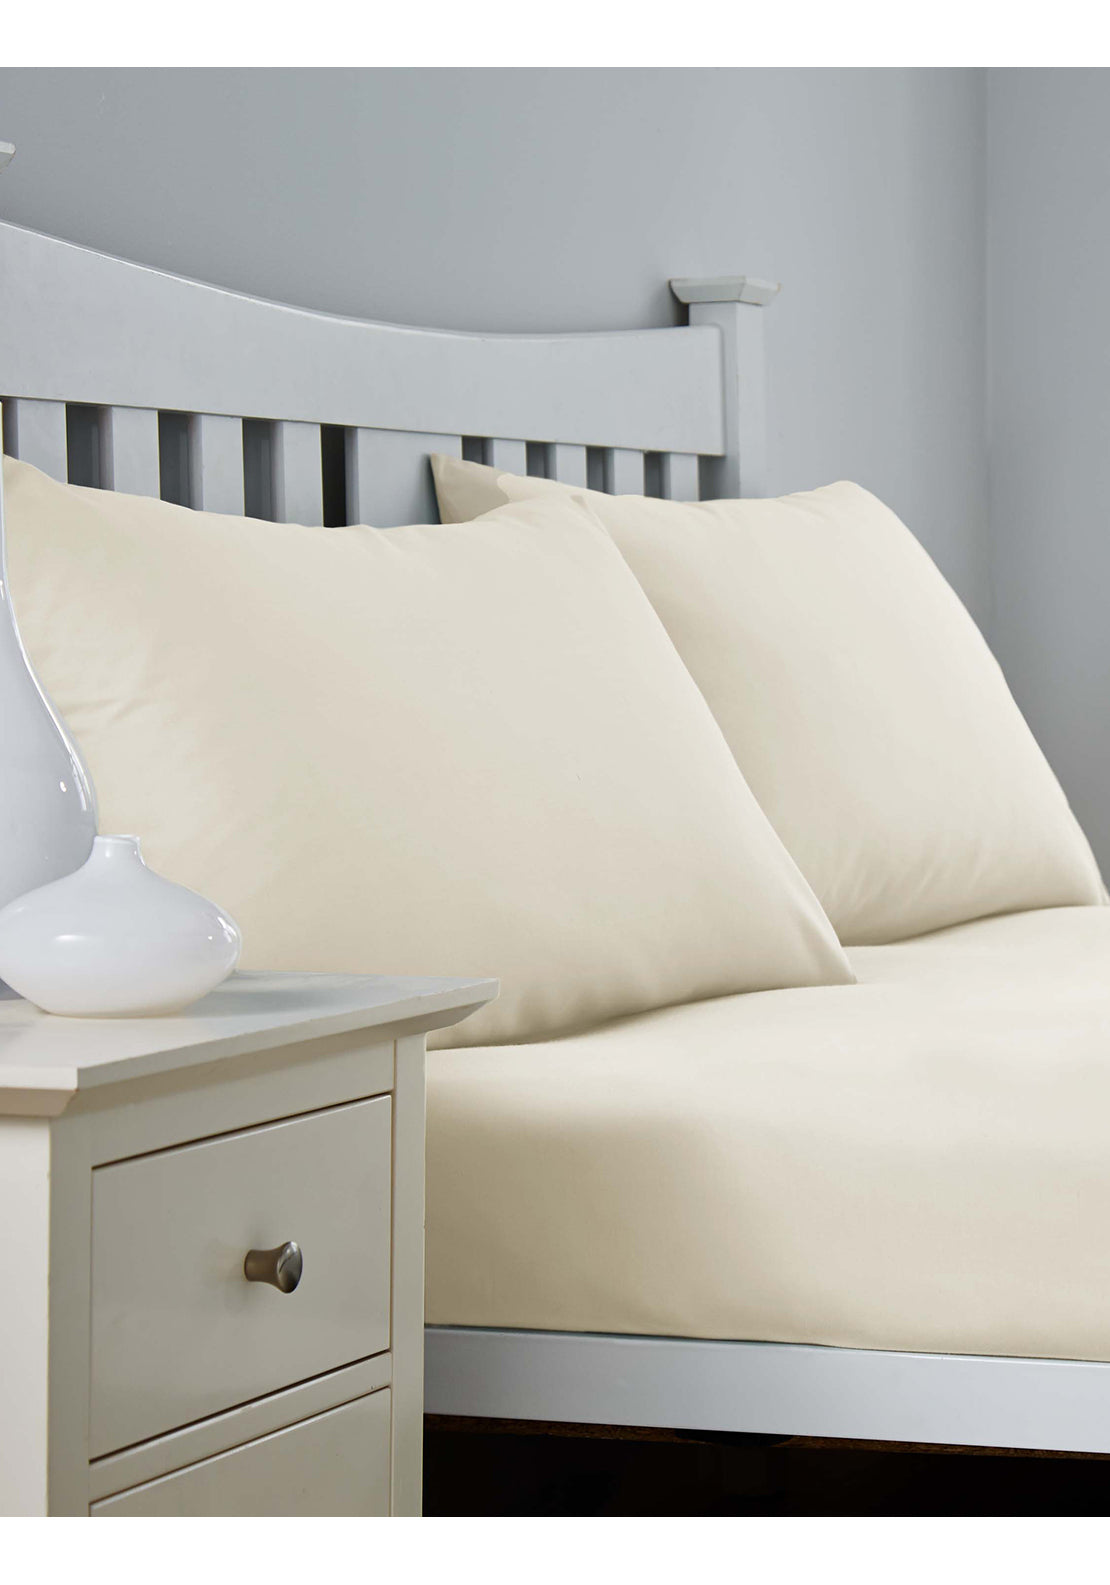 The Home Collection 300 Thread Count Standard Pillowcase Pair - Cream 1 Shaws Department Stores